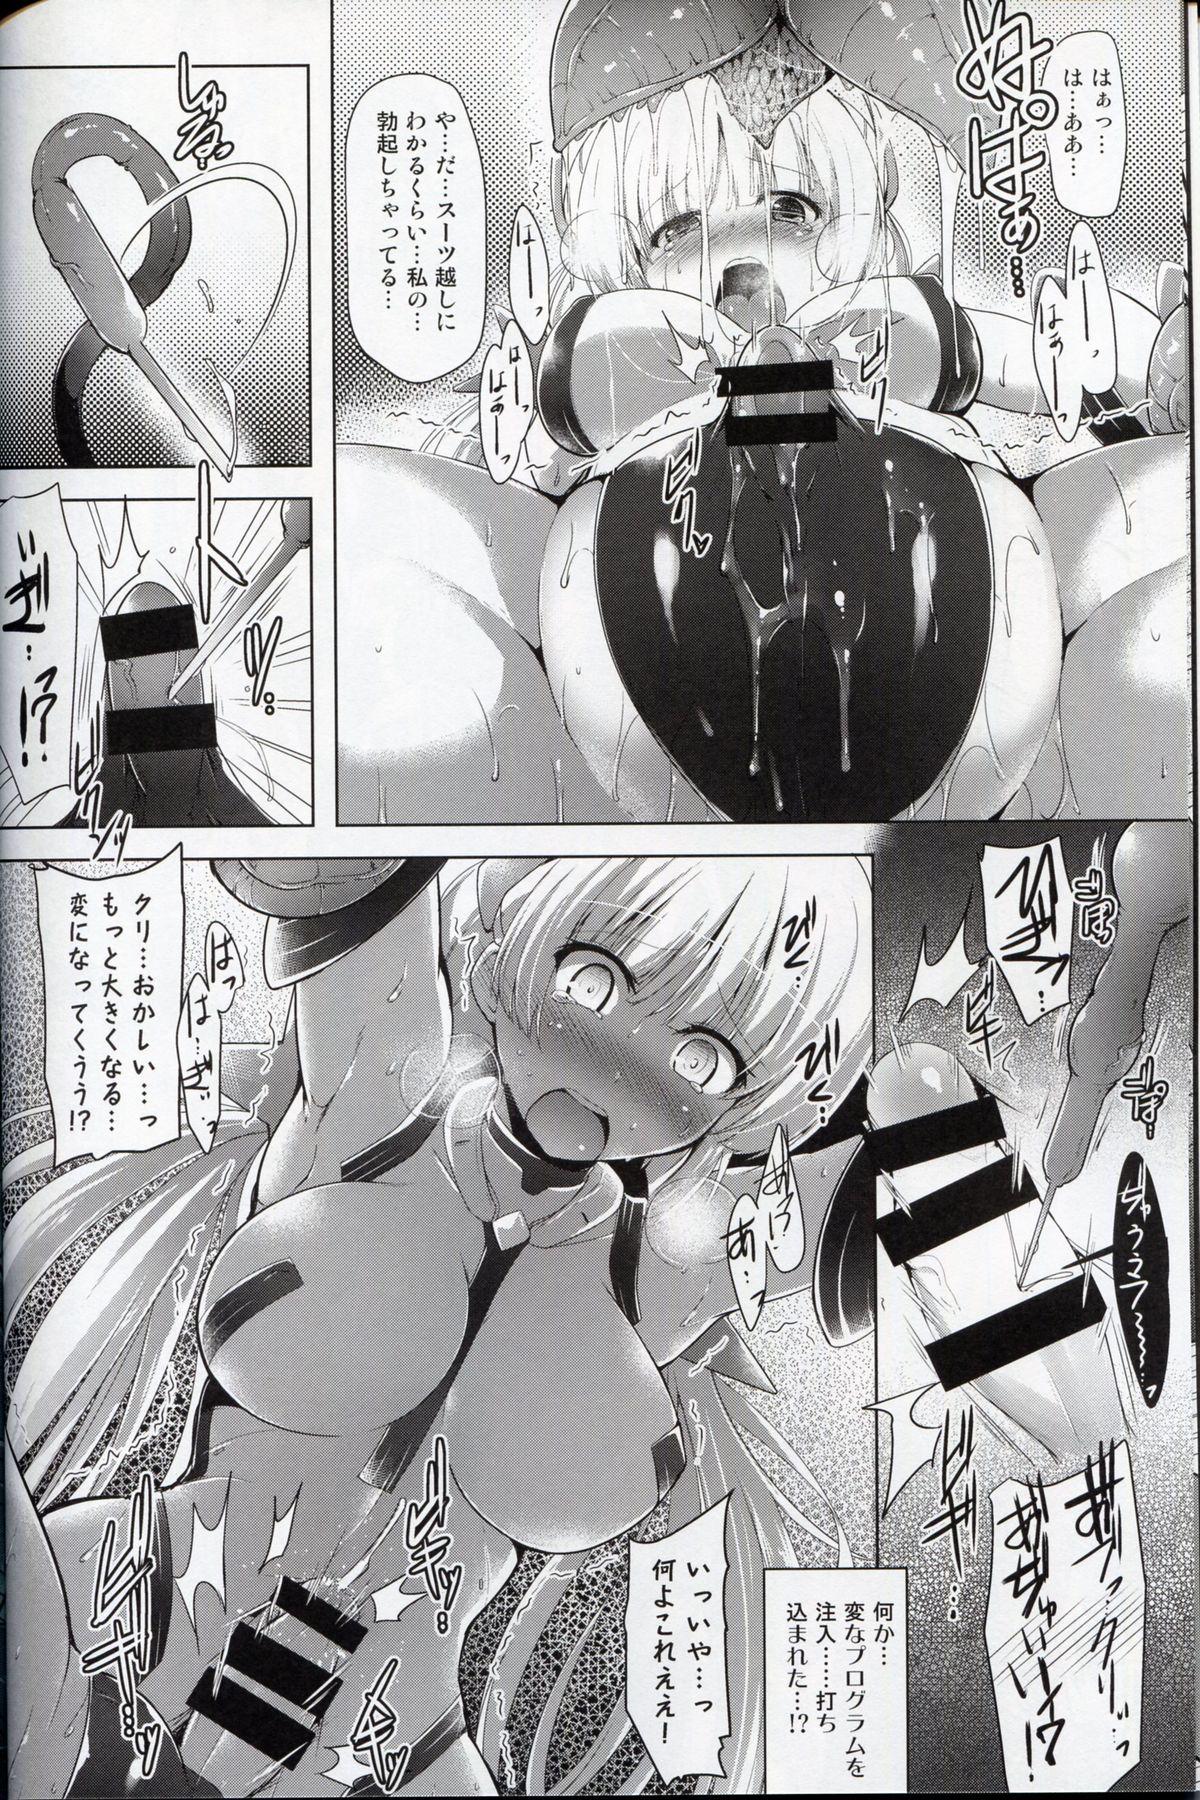 Beurette K.231 - Expelled from paradise Tia - Page 7